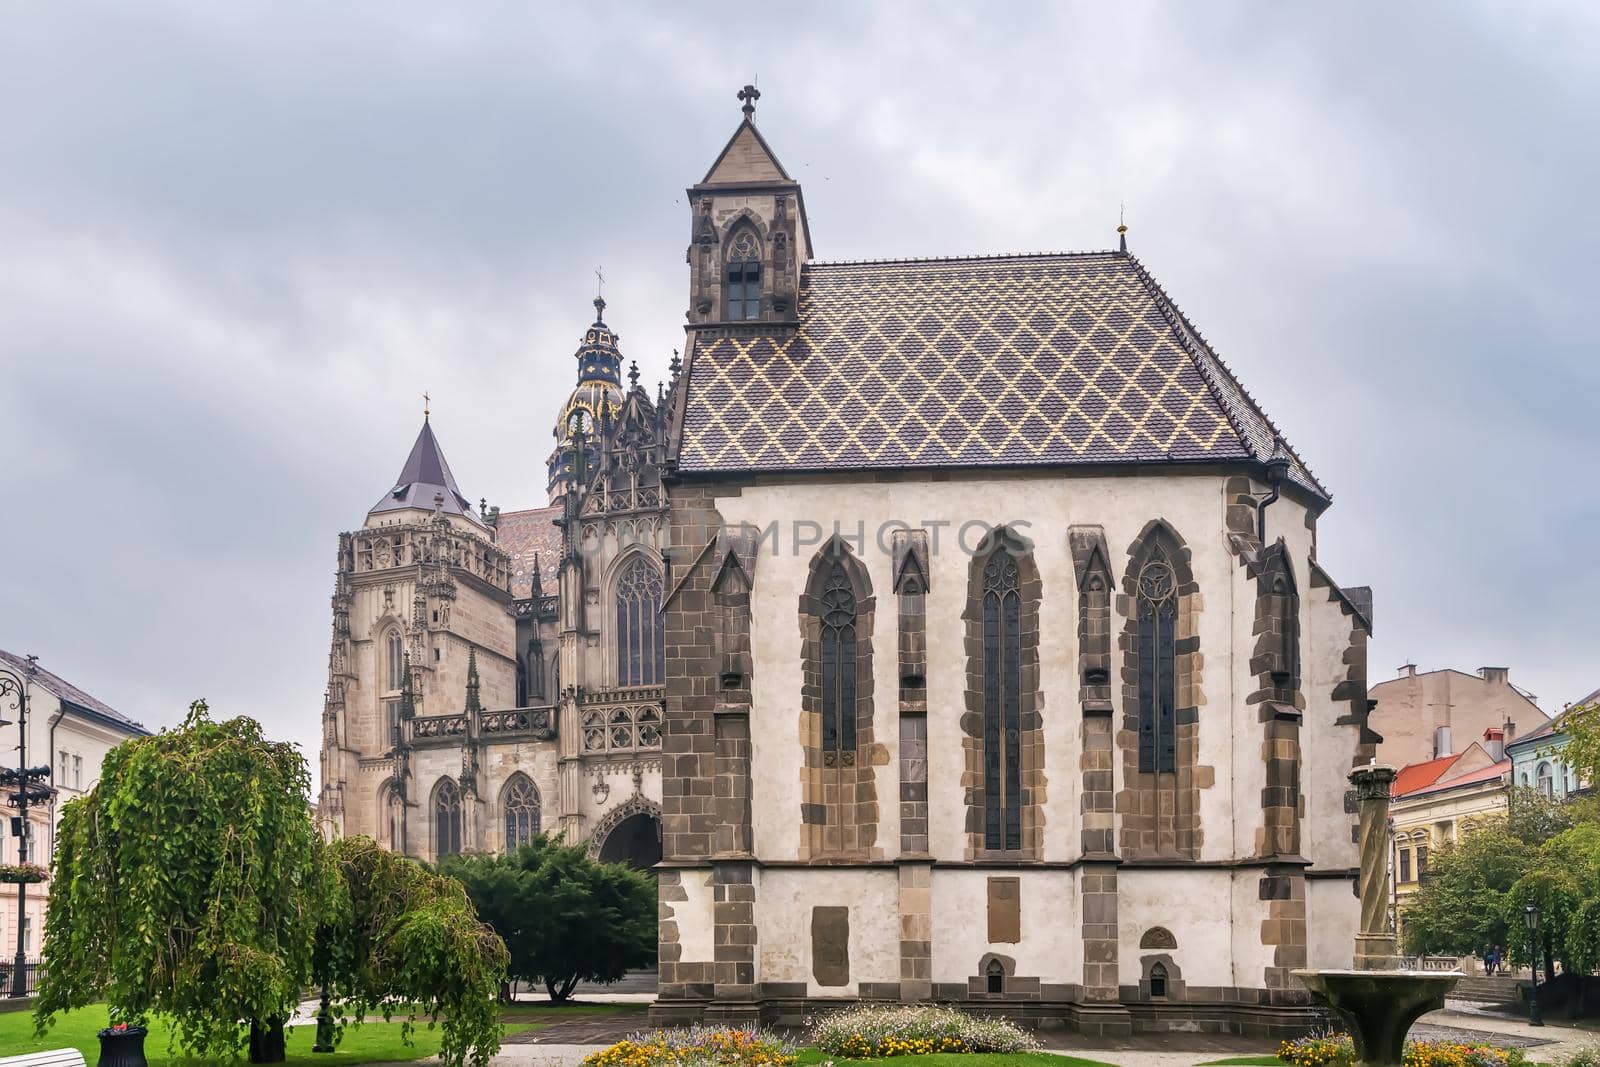 St Michael Chapel and cathedral of St Elisabeth in Kosice, Slovakia